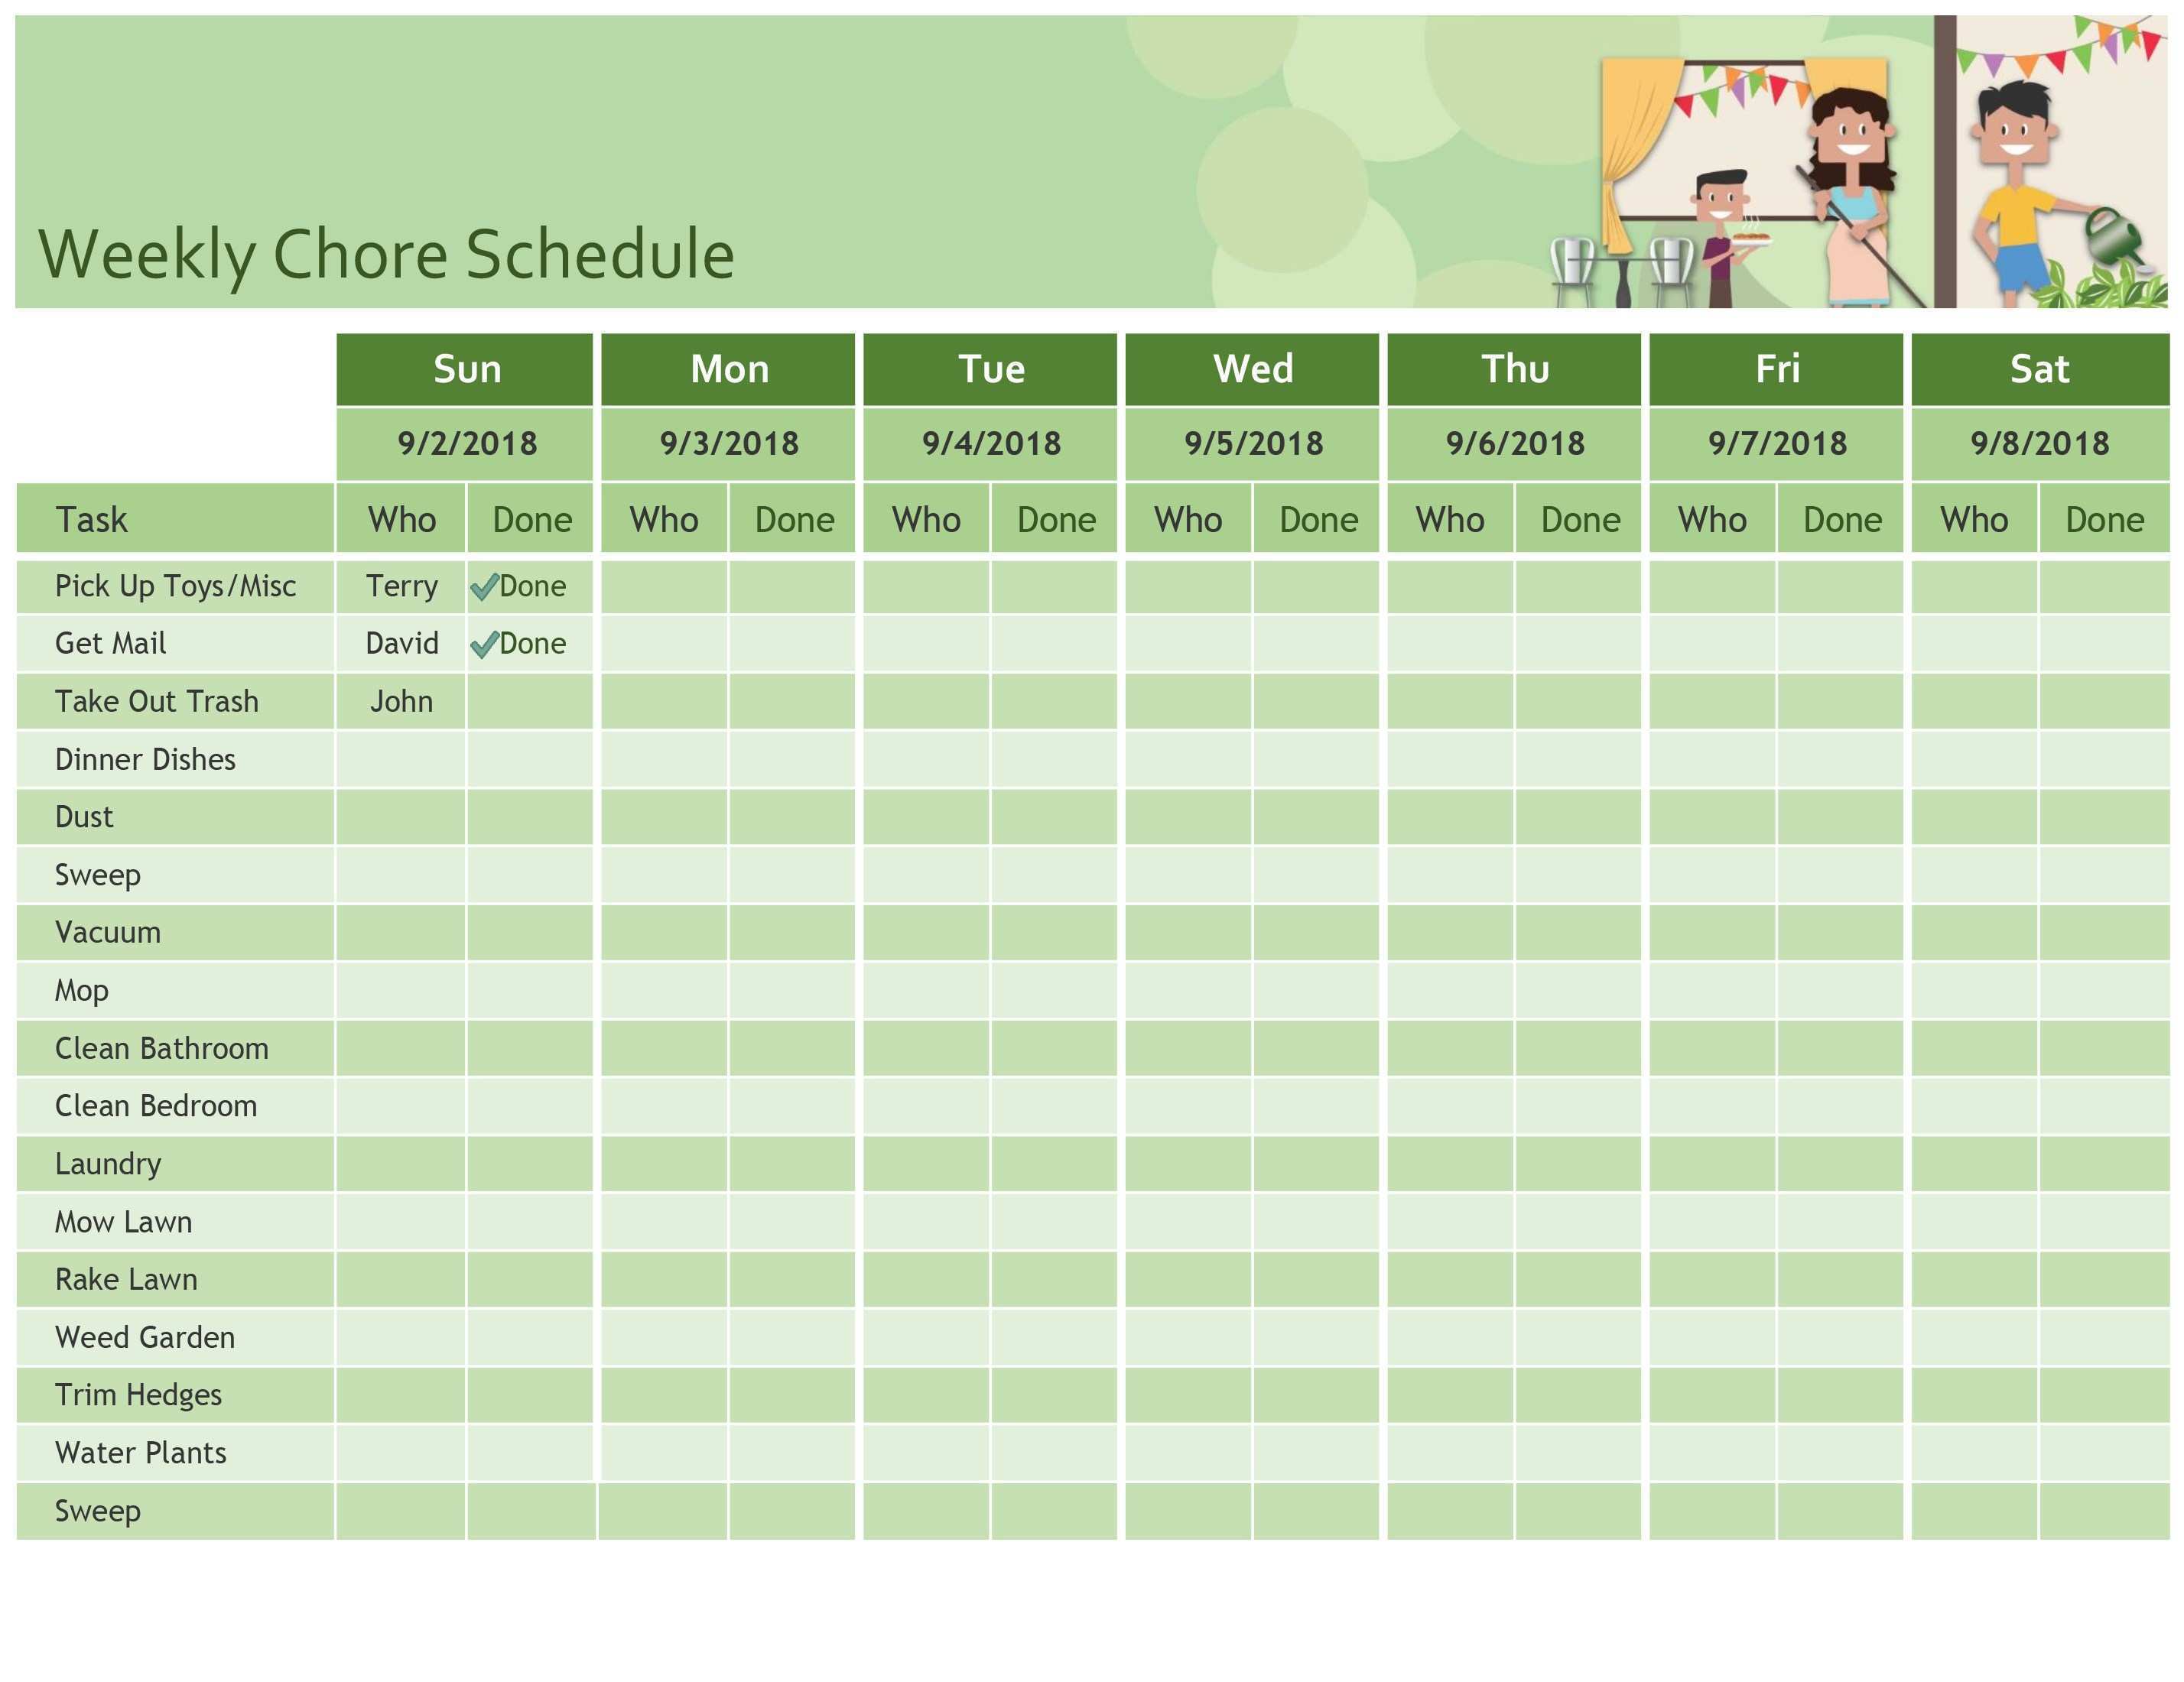 75 Free Class Schedule Template Html Maker by Class Schedule Template Html